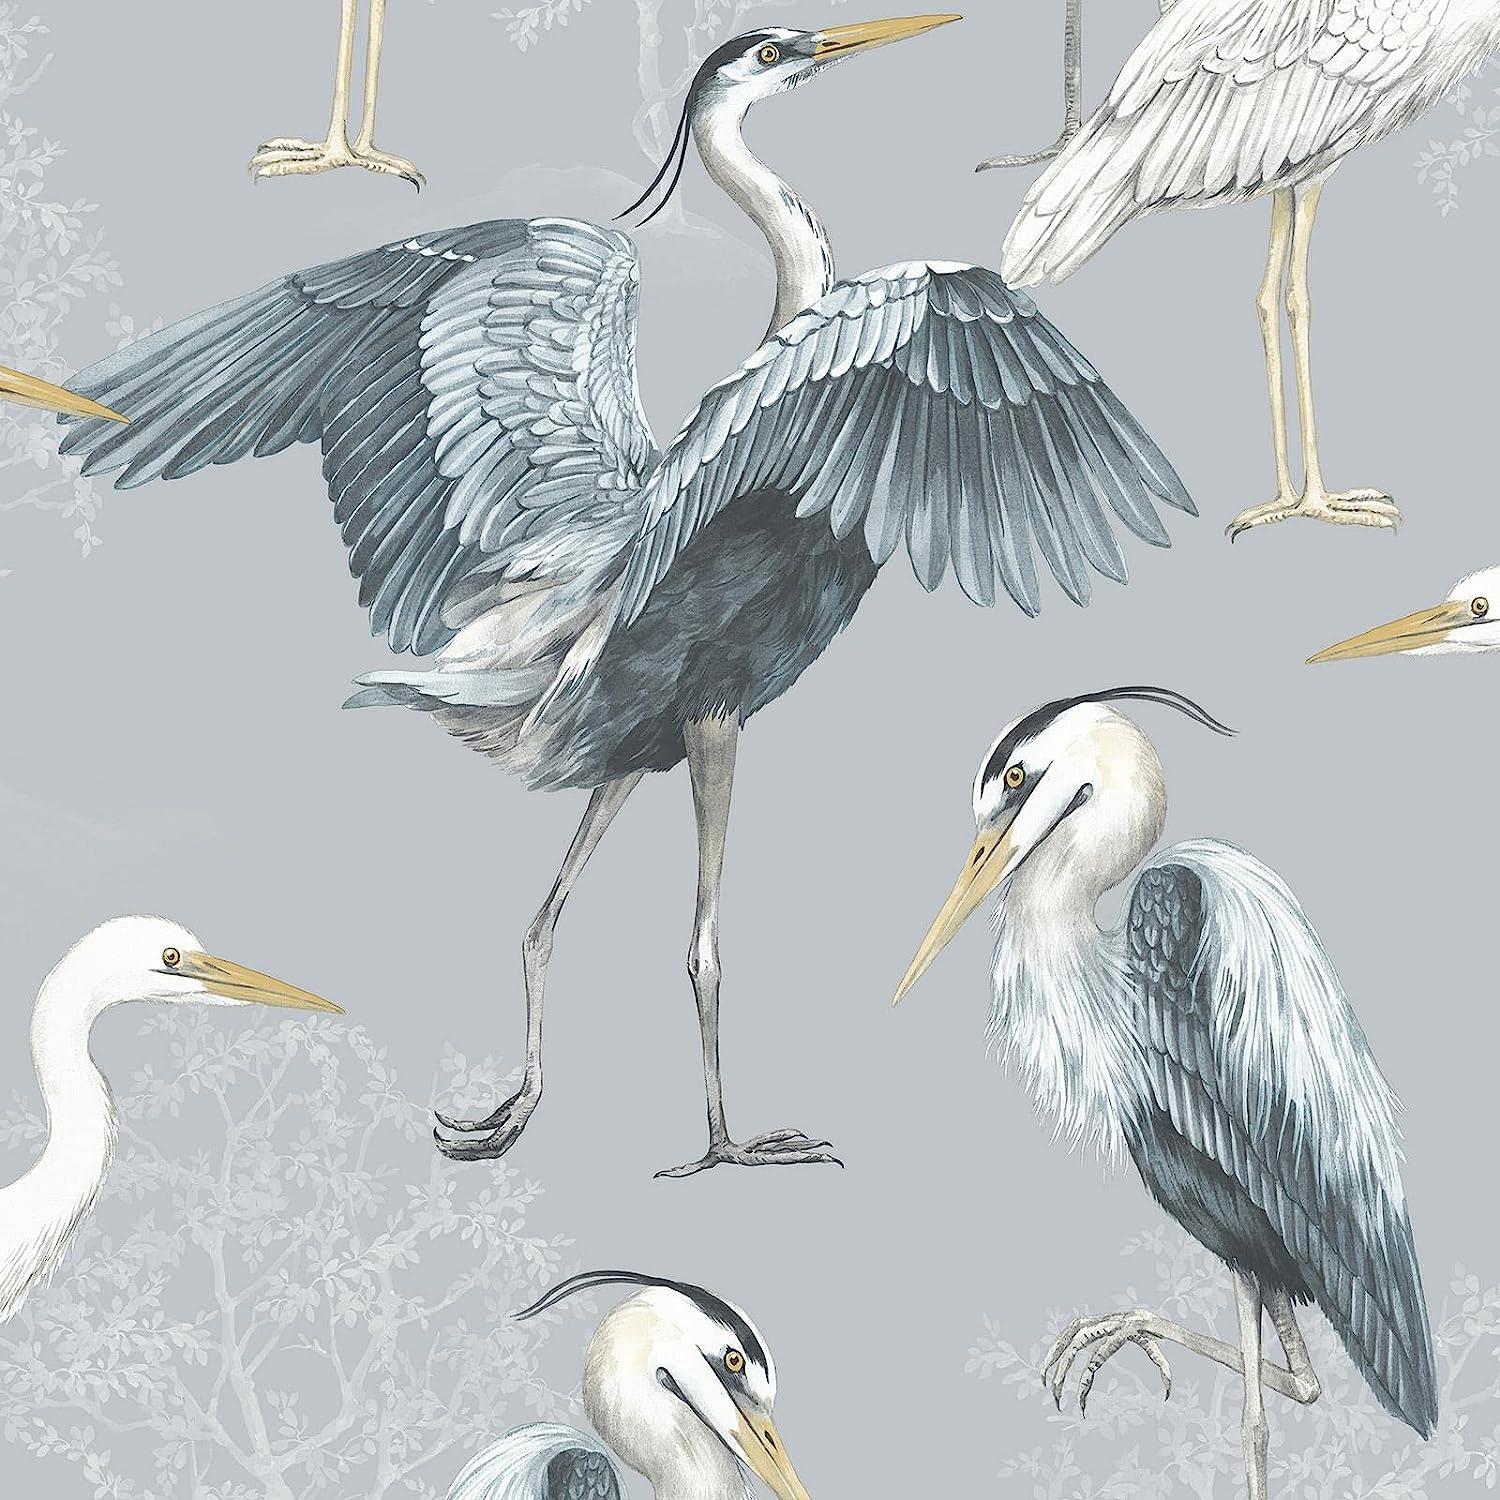 RASCH (U.K) Limited Dimension Heron Wallpaper - Modern Wallpaper for Living Room, Bedroom, Fireplace - Decorative Luxury Nature Wall Paper with Hand-Drawn Herons & Trees (White/Grey/Blue)